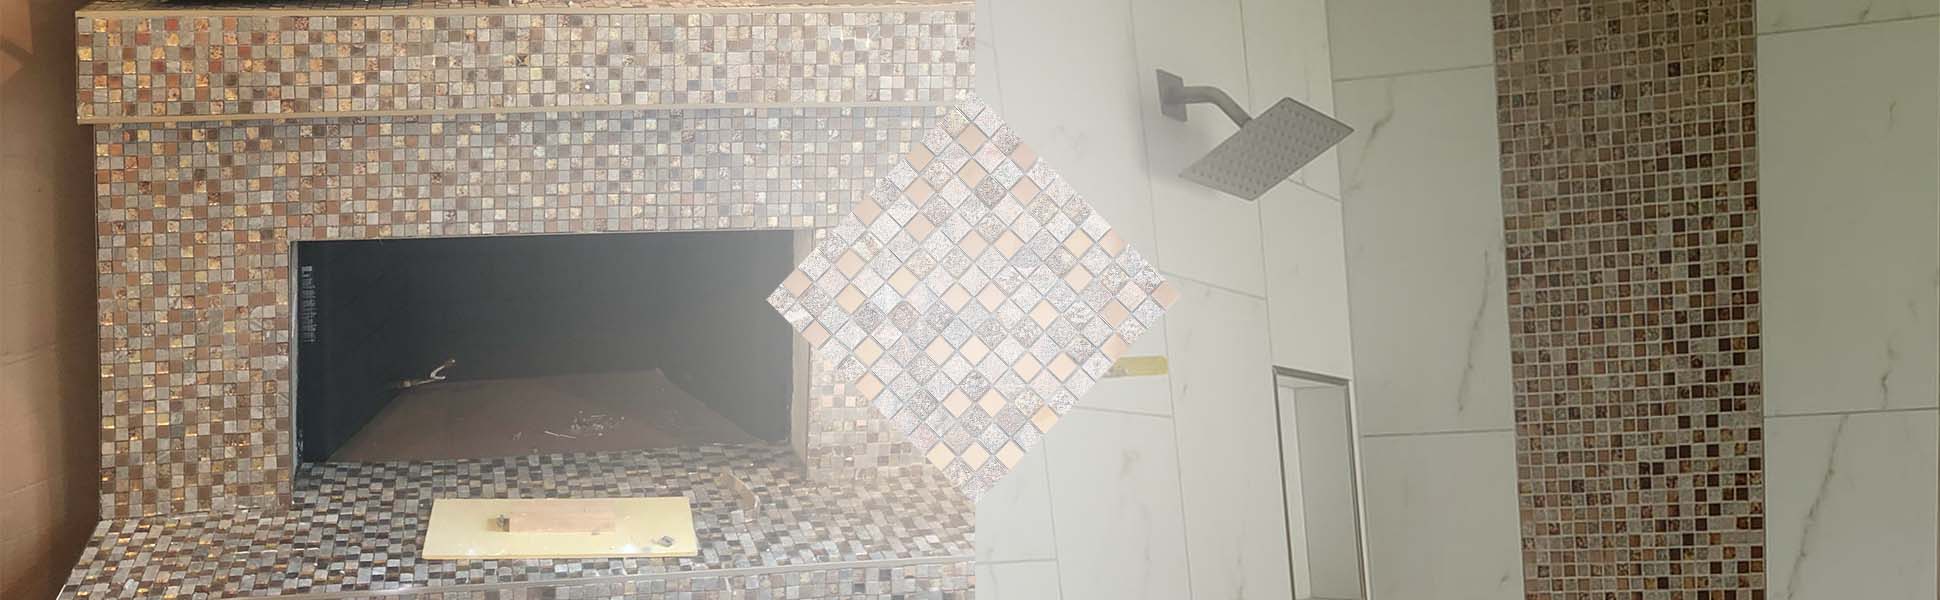 Fireplace Surround Wall Tile